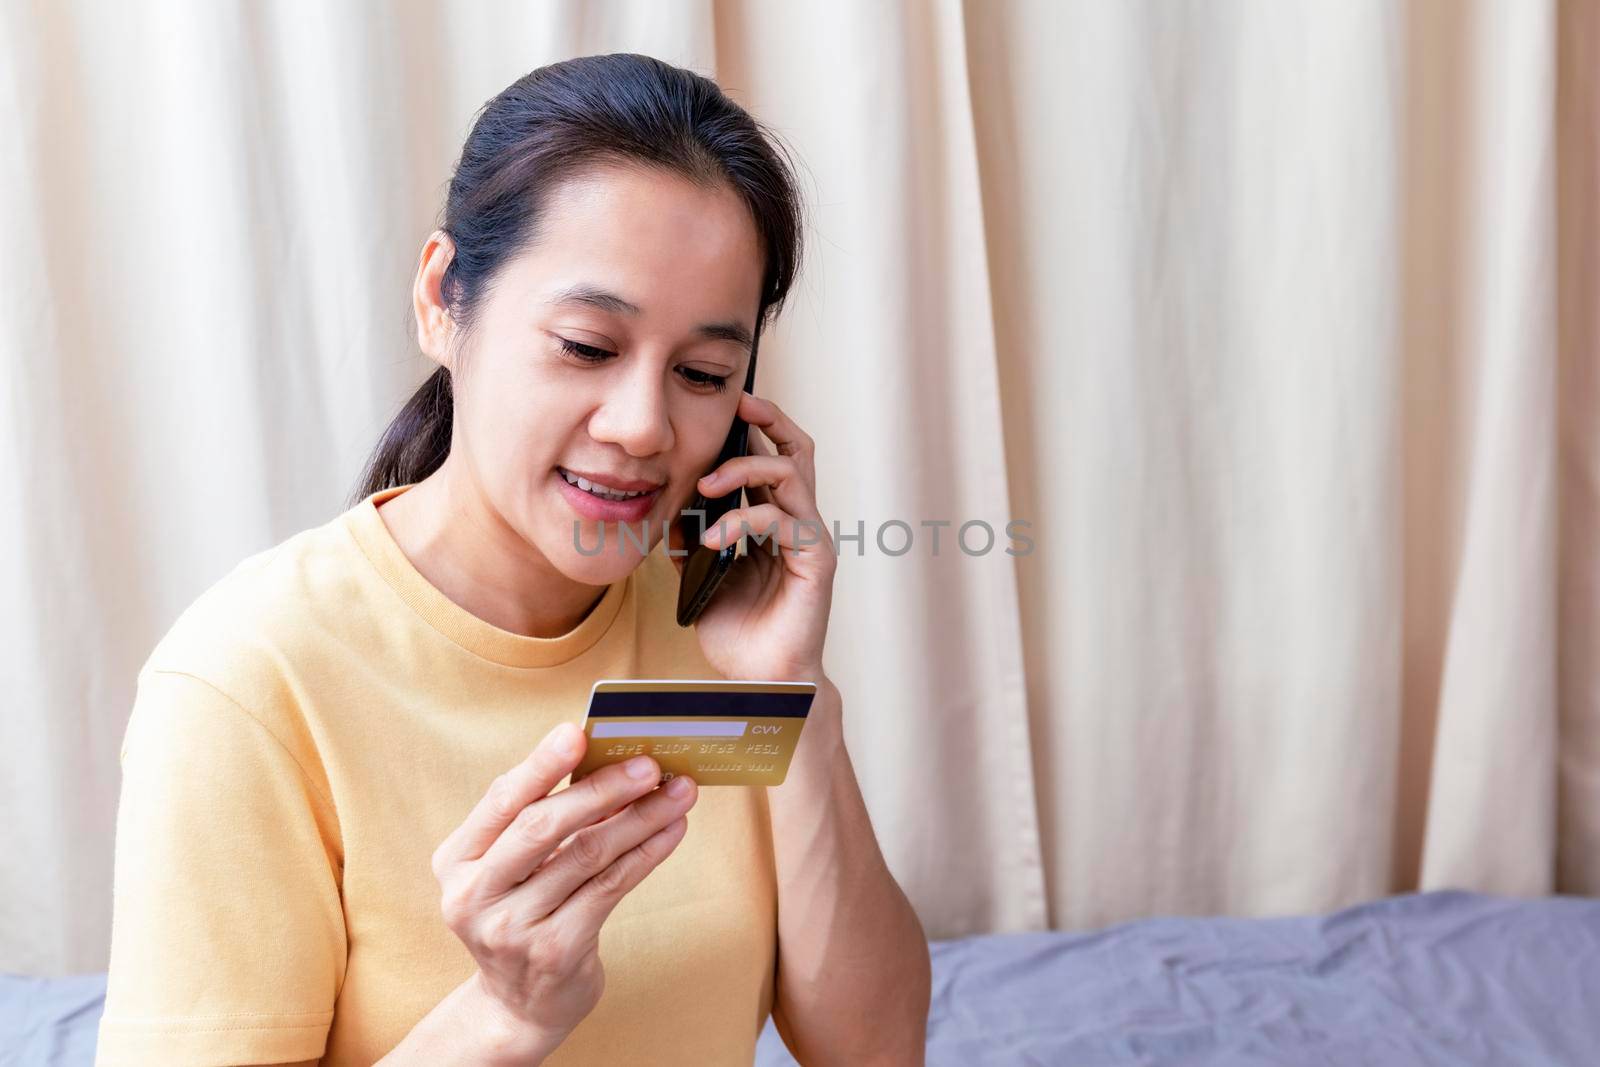 Happy asian women use smart phone and creadit card speak to pay shopping online. Women use smartphone order shopping online and pay with creadit card. stay home covid-19 online shopping concept.